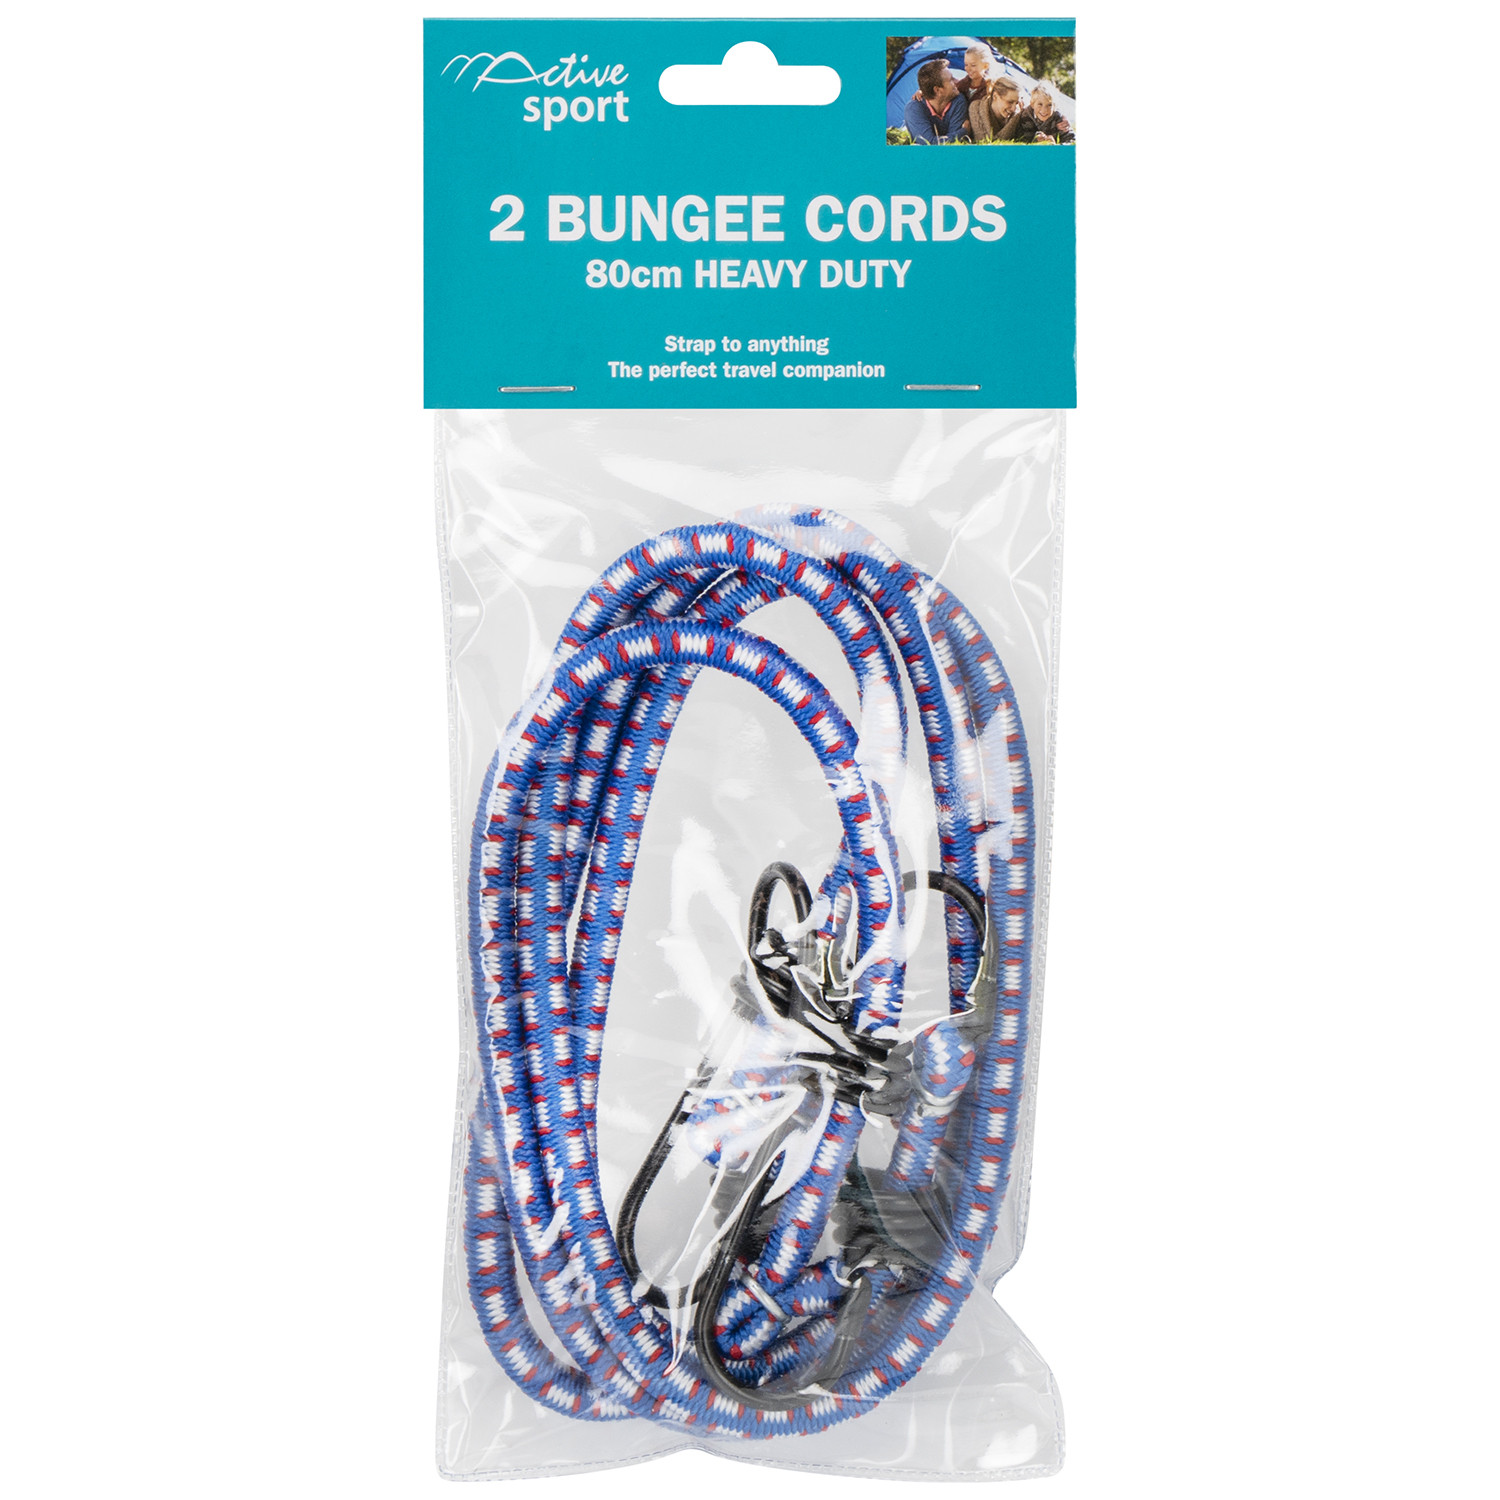 Active Sport Bungee Cords 2 Pack Image 1